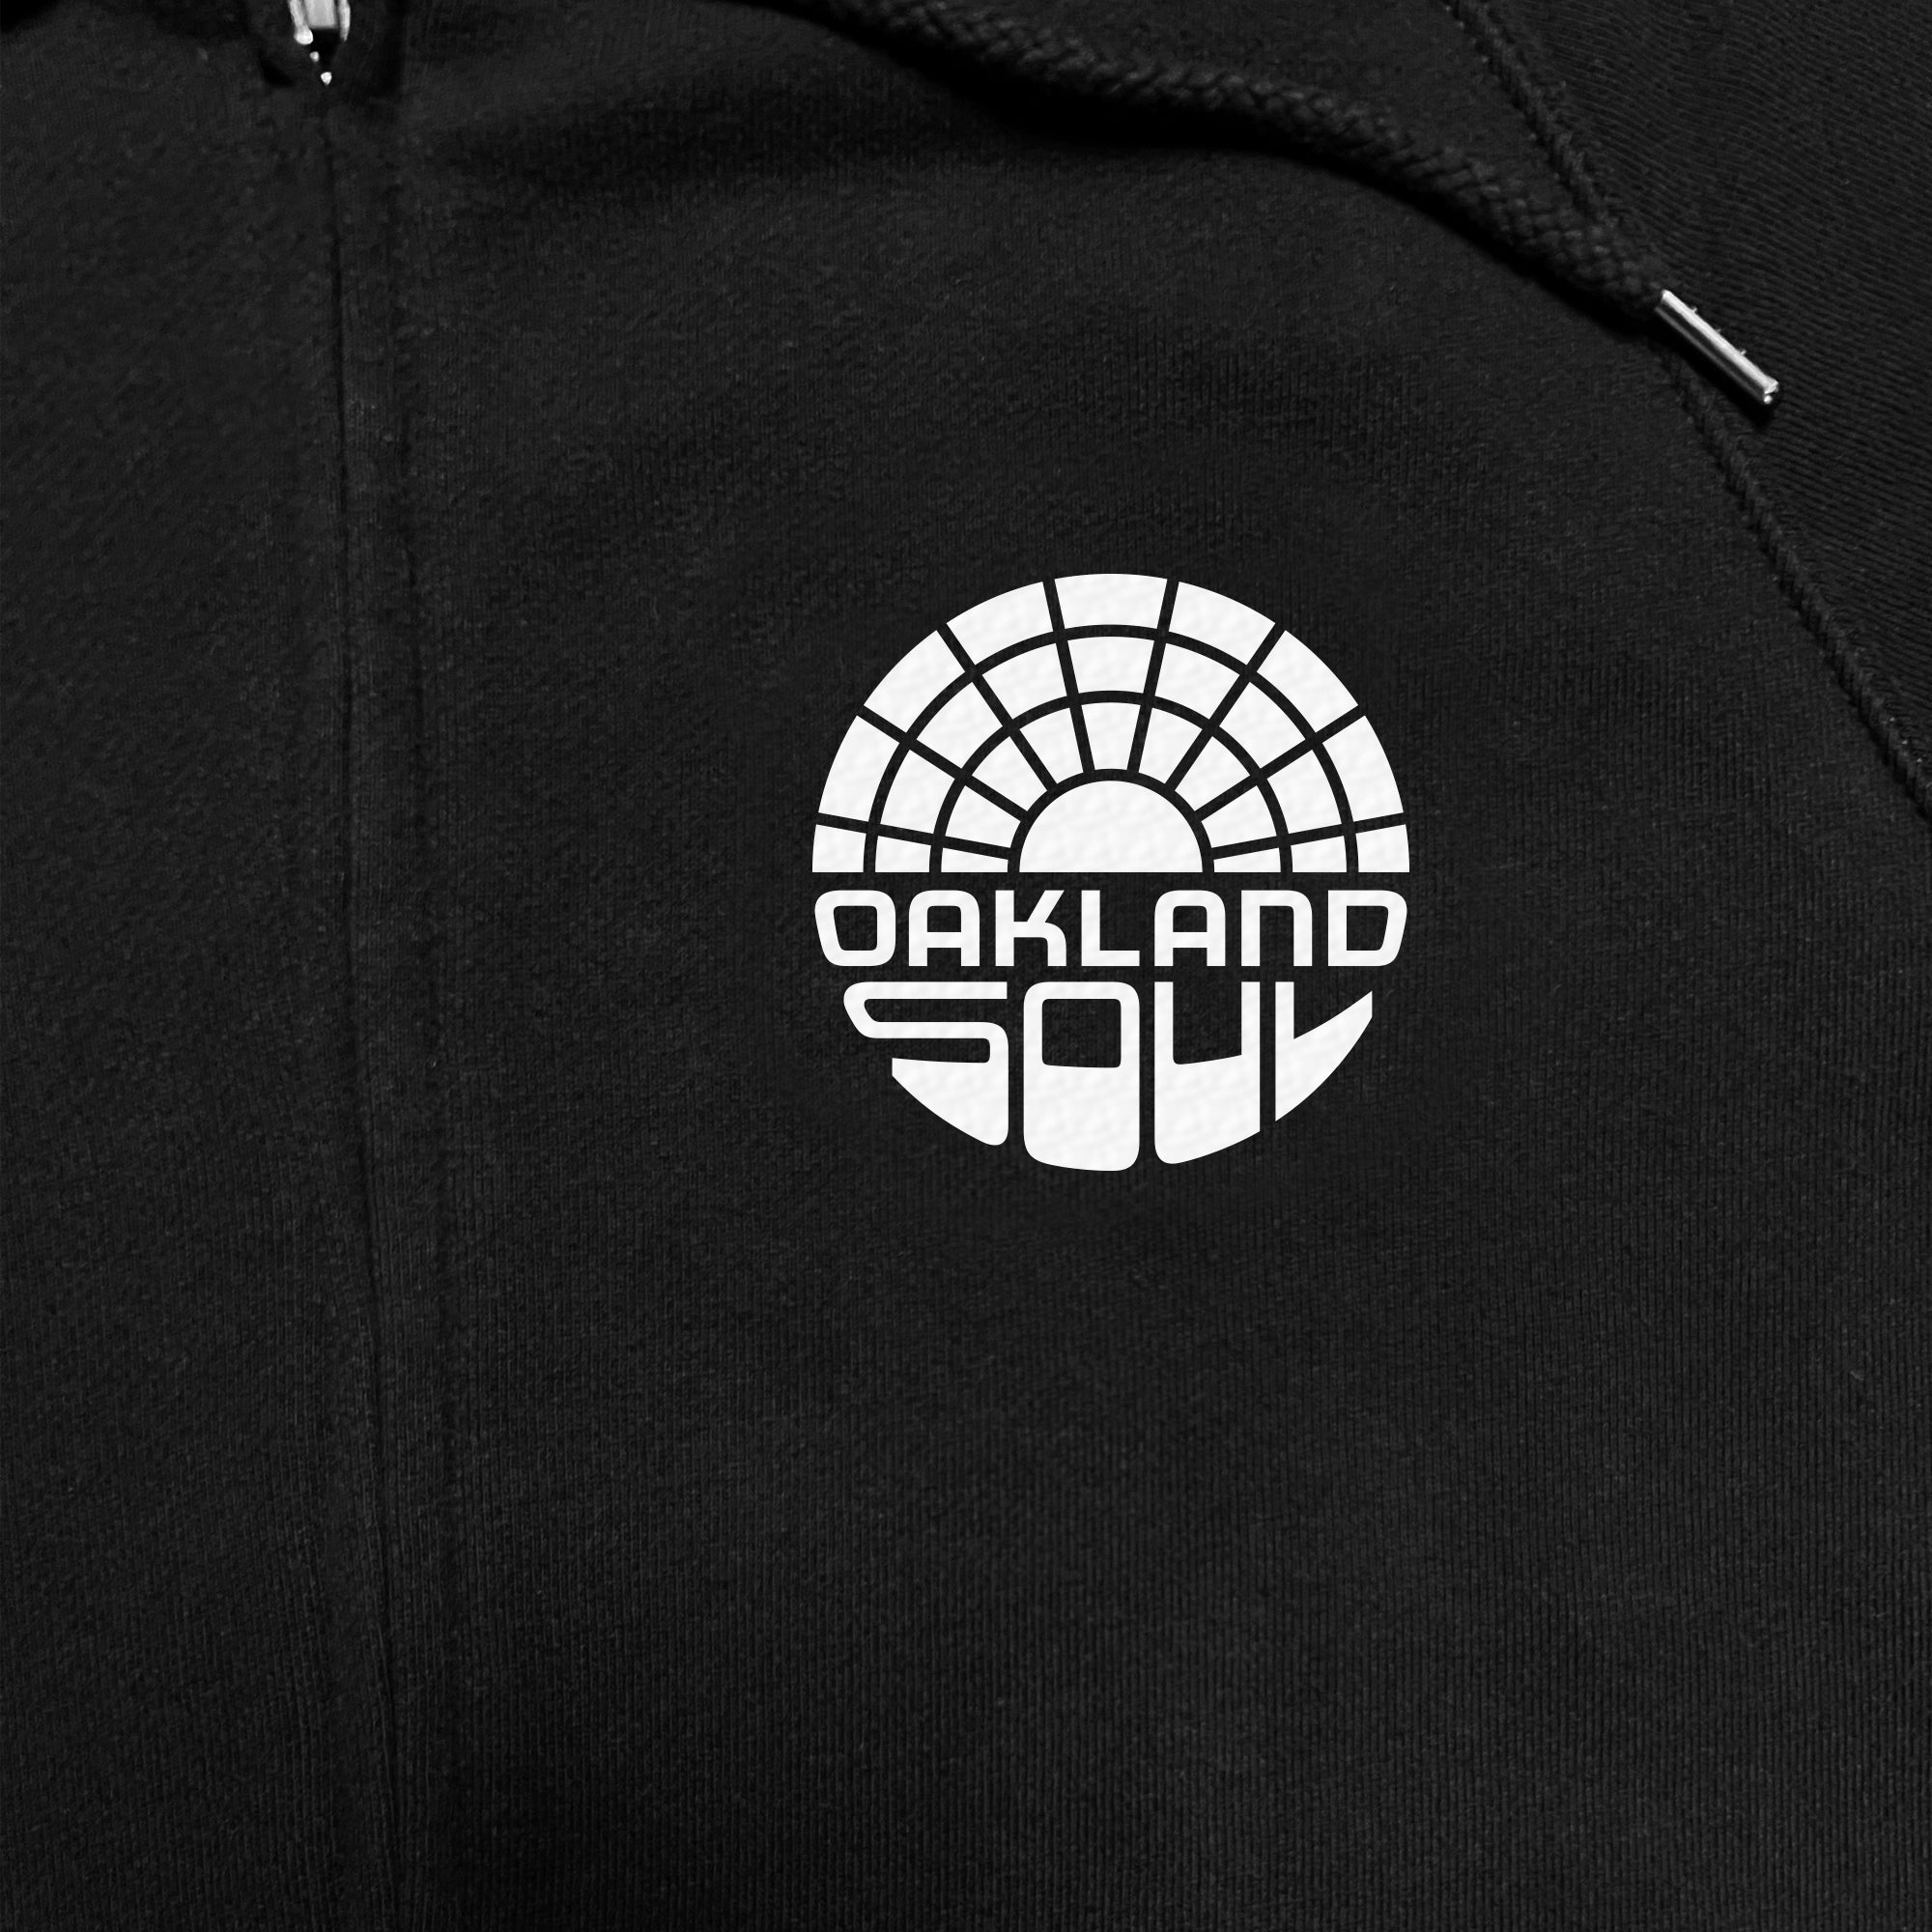 Close up of white Oakland Soul logo on a black zip hoodie.